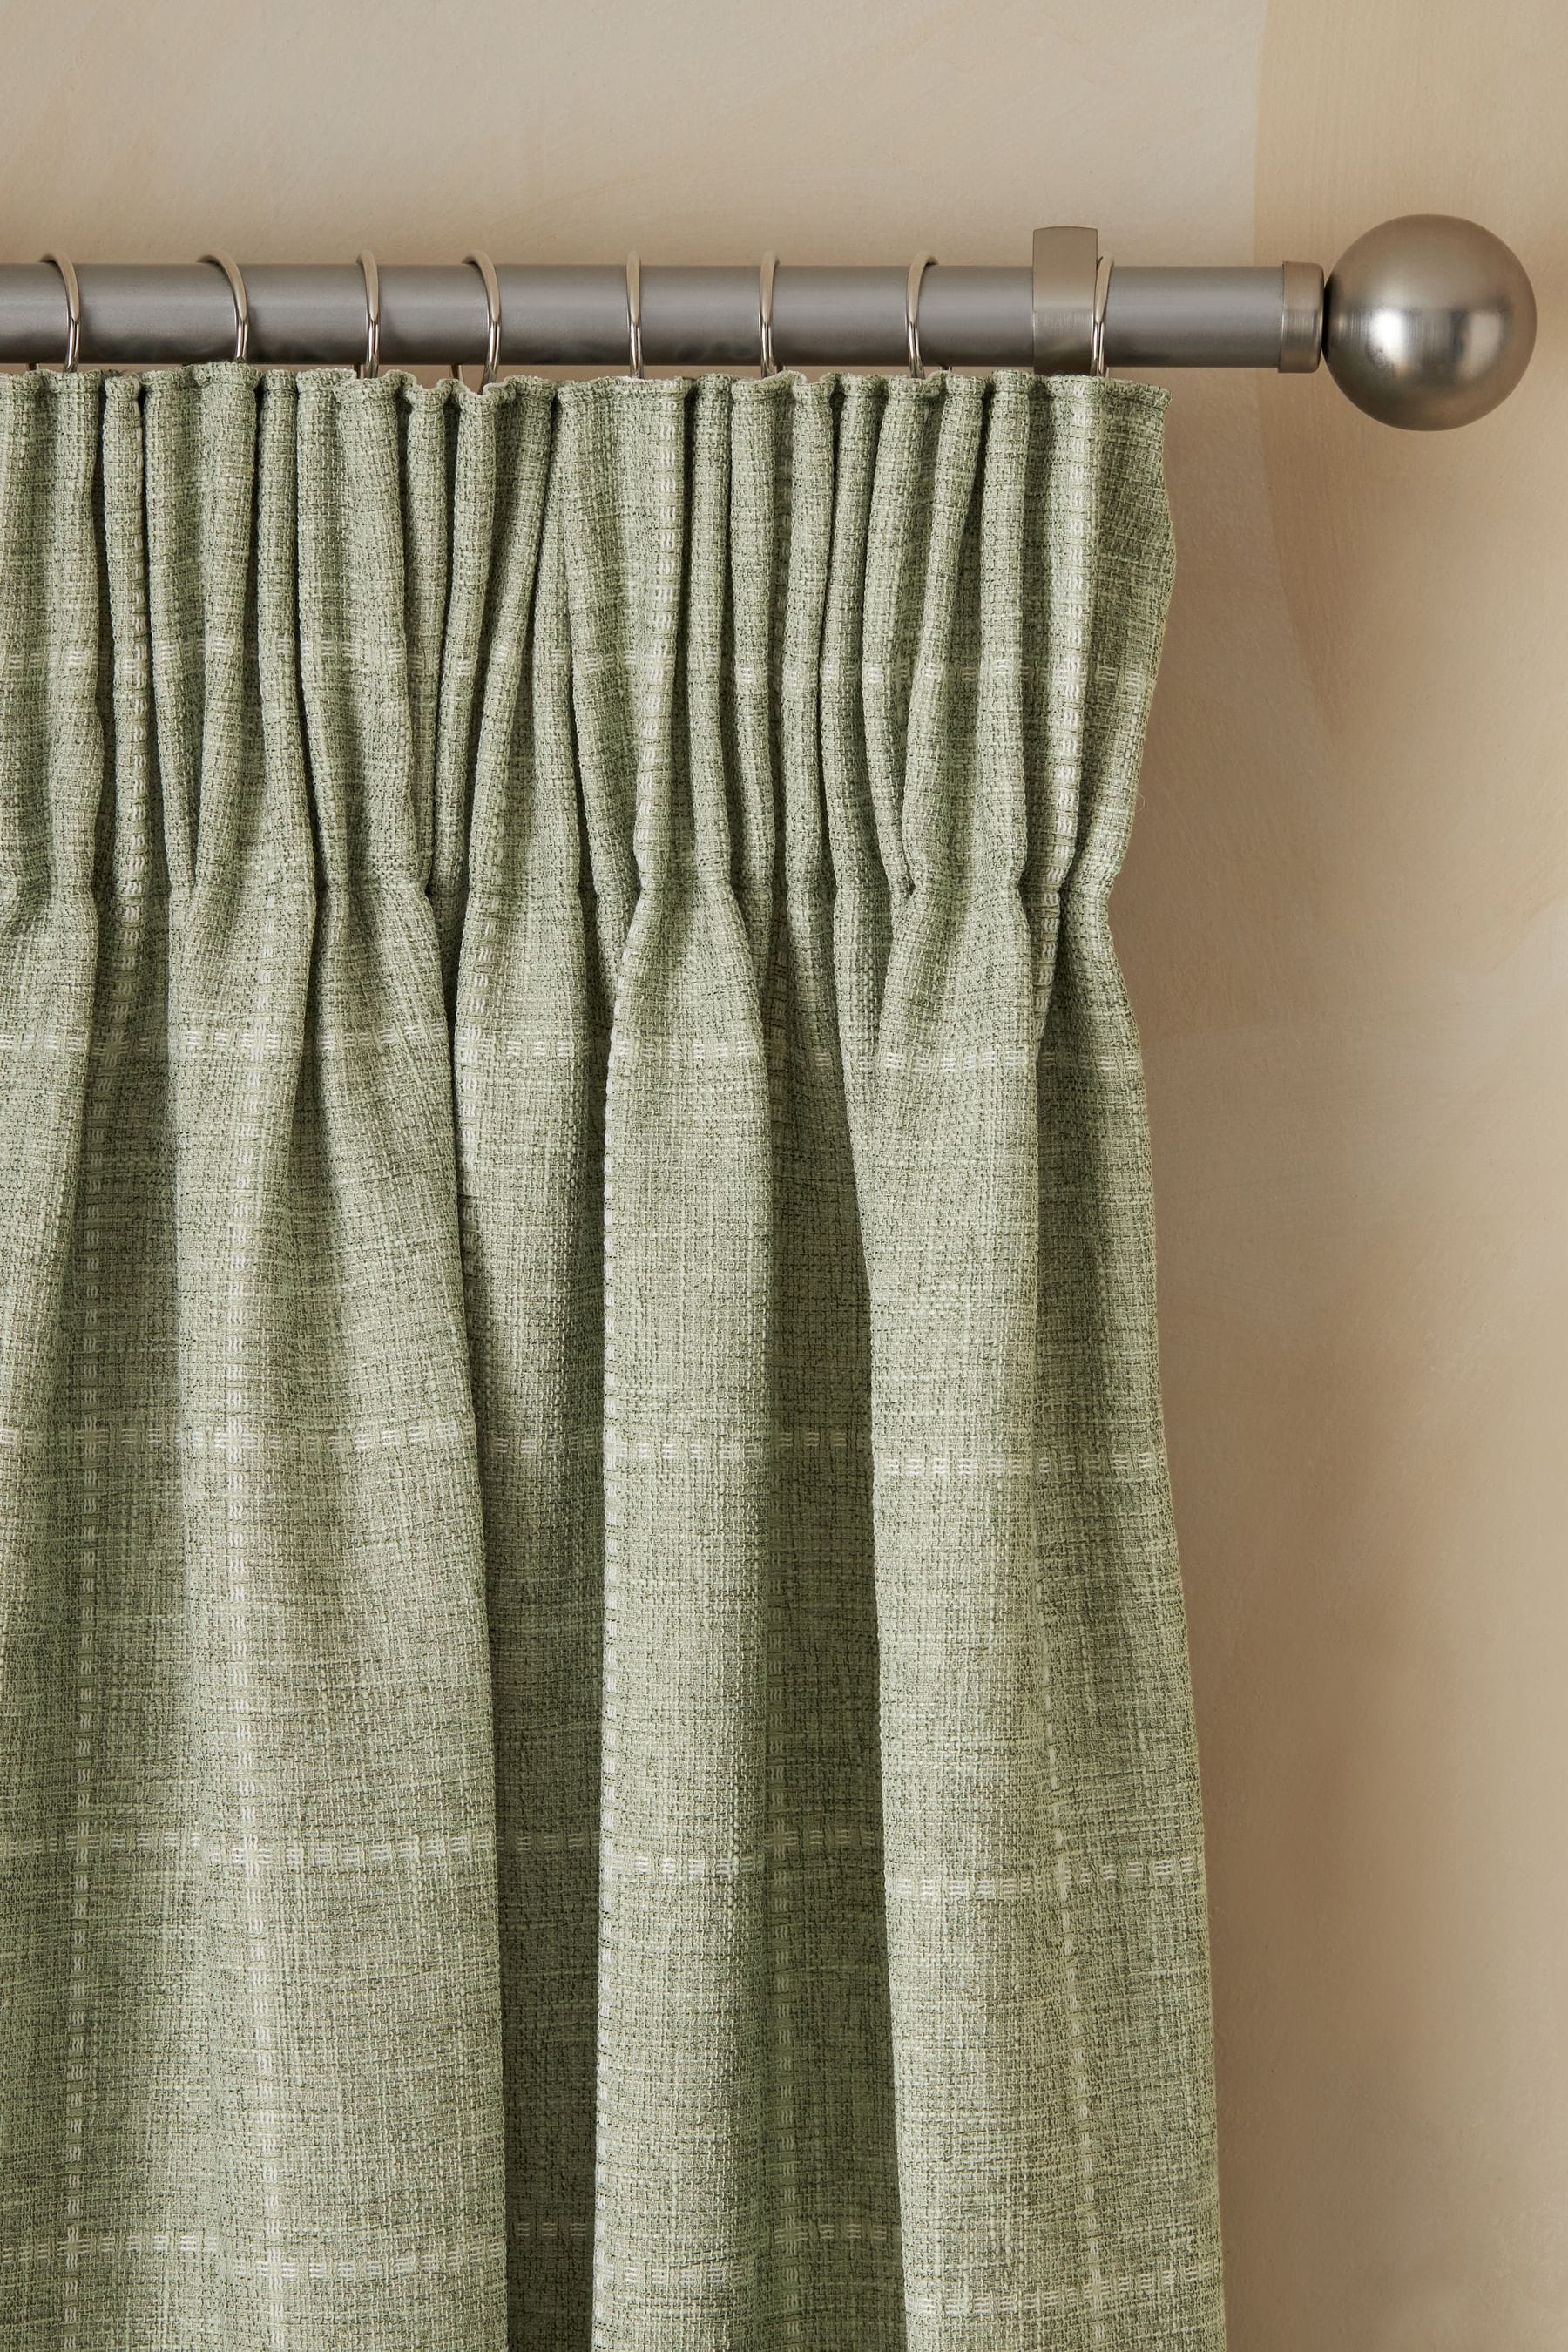 Buy Sage Green Windowpane Check Lined Pencil Pleat Curtains from the ...